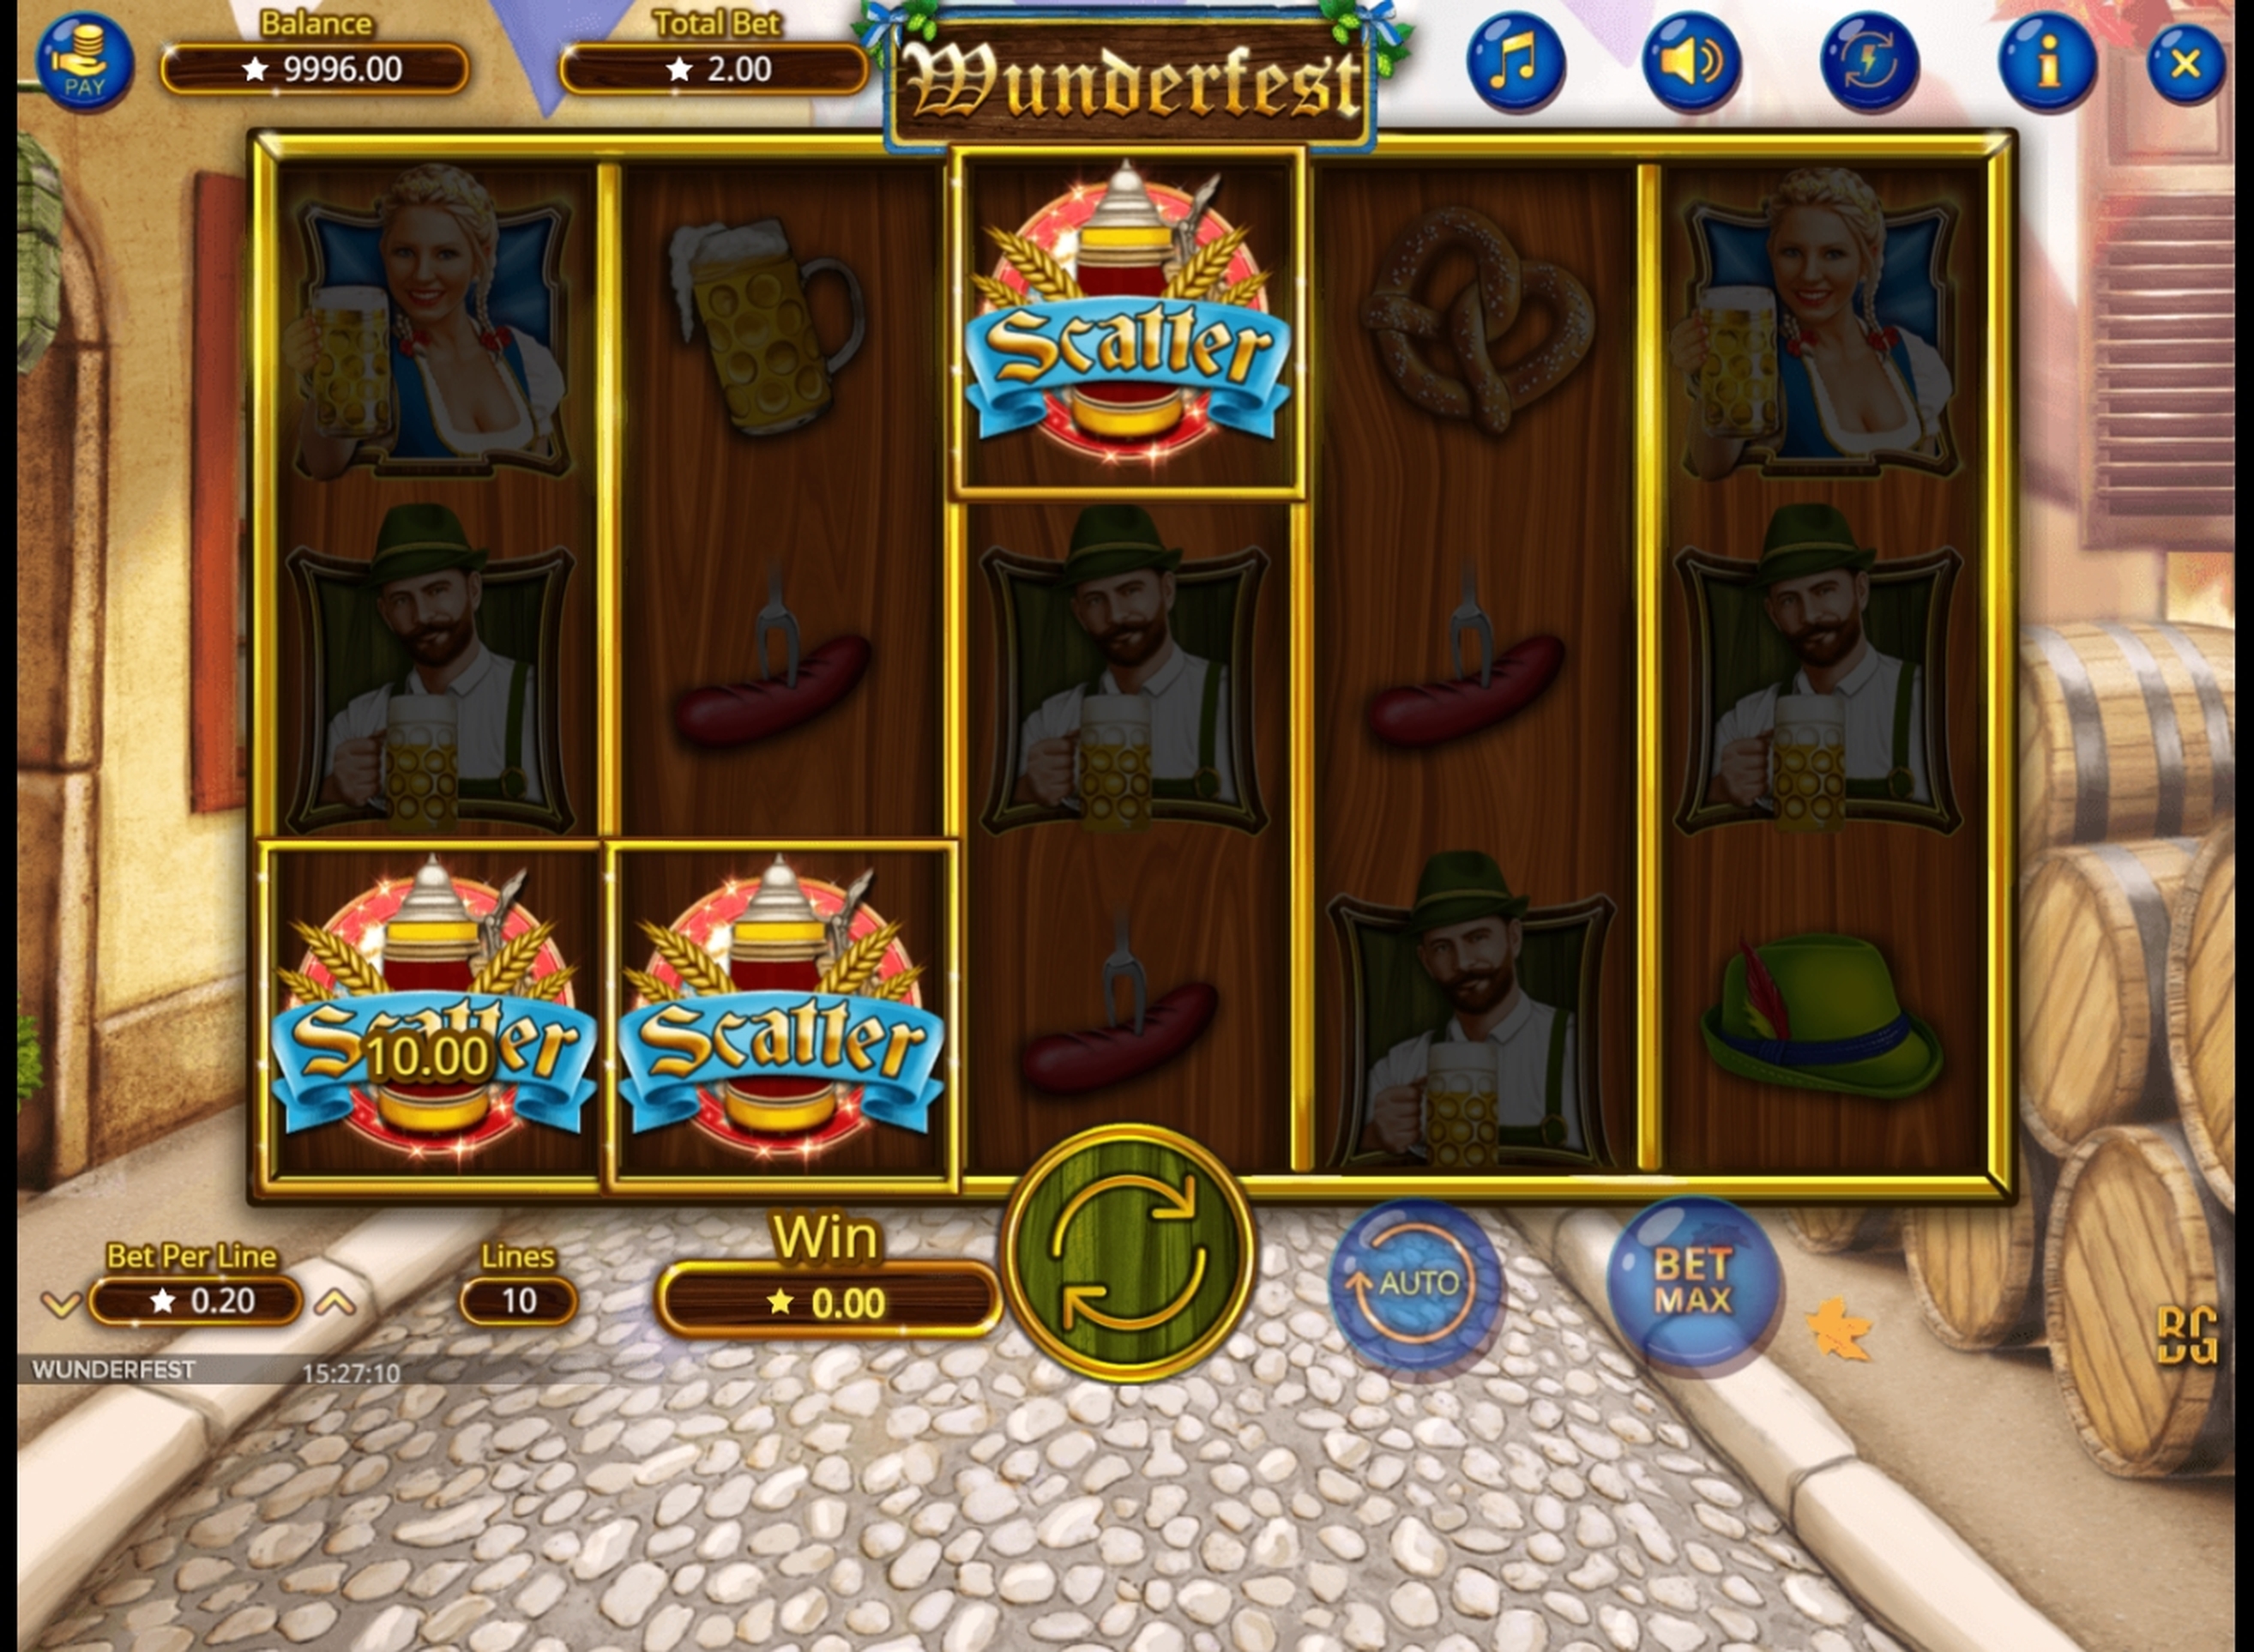 Win Money in Wunderfest Free Slot Game by Booming Games